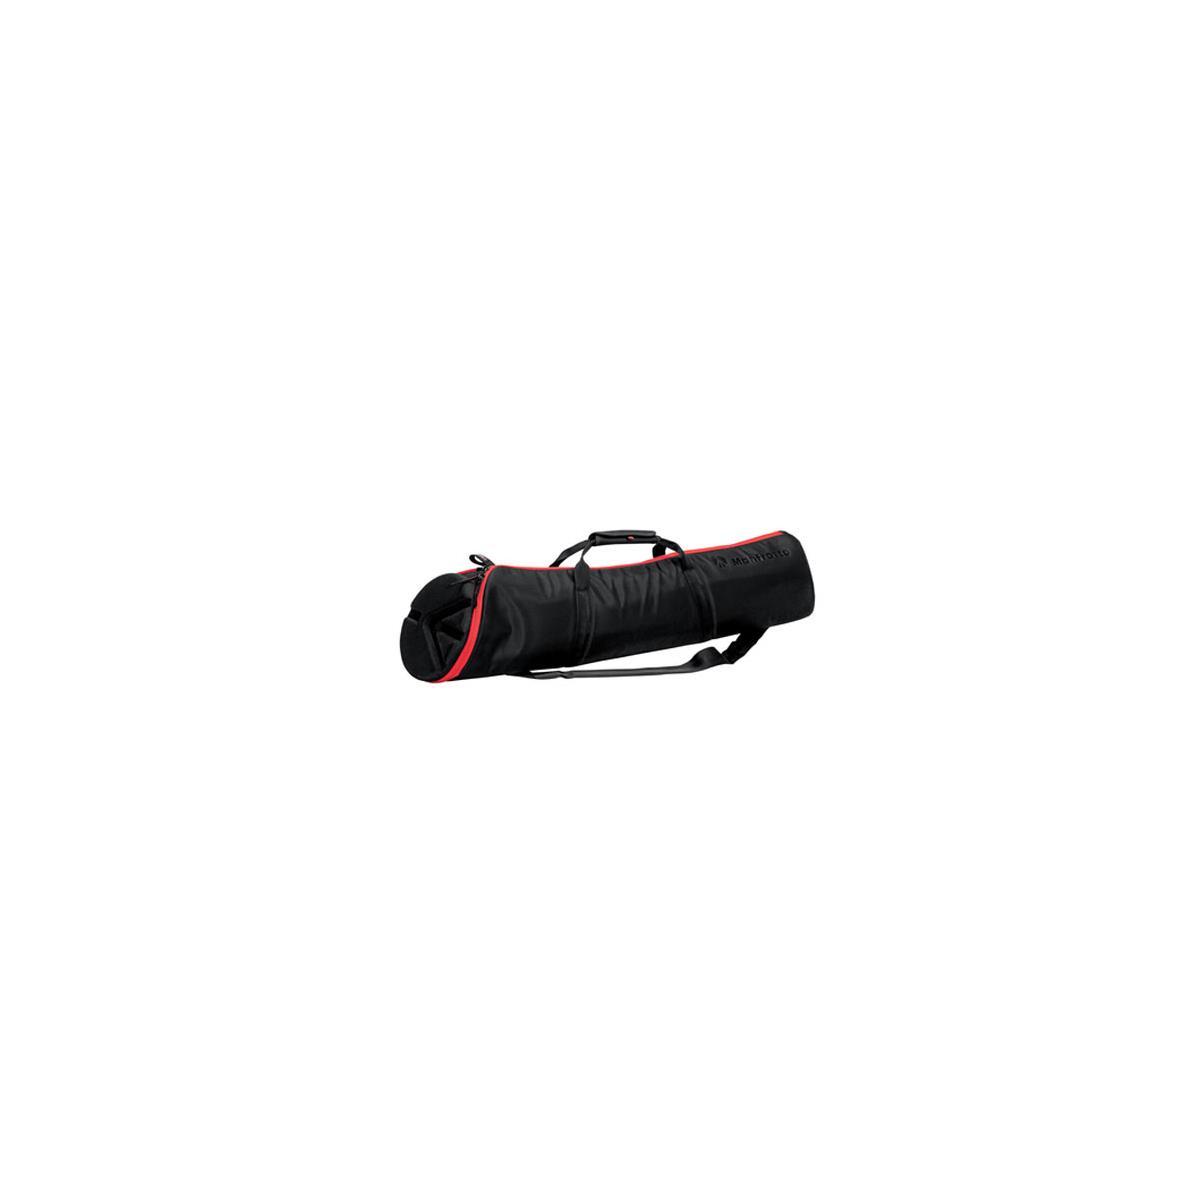 Manfrotto MBAG90PN Padded Tripod Bag